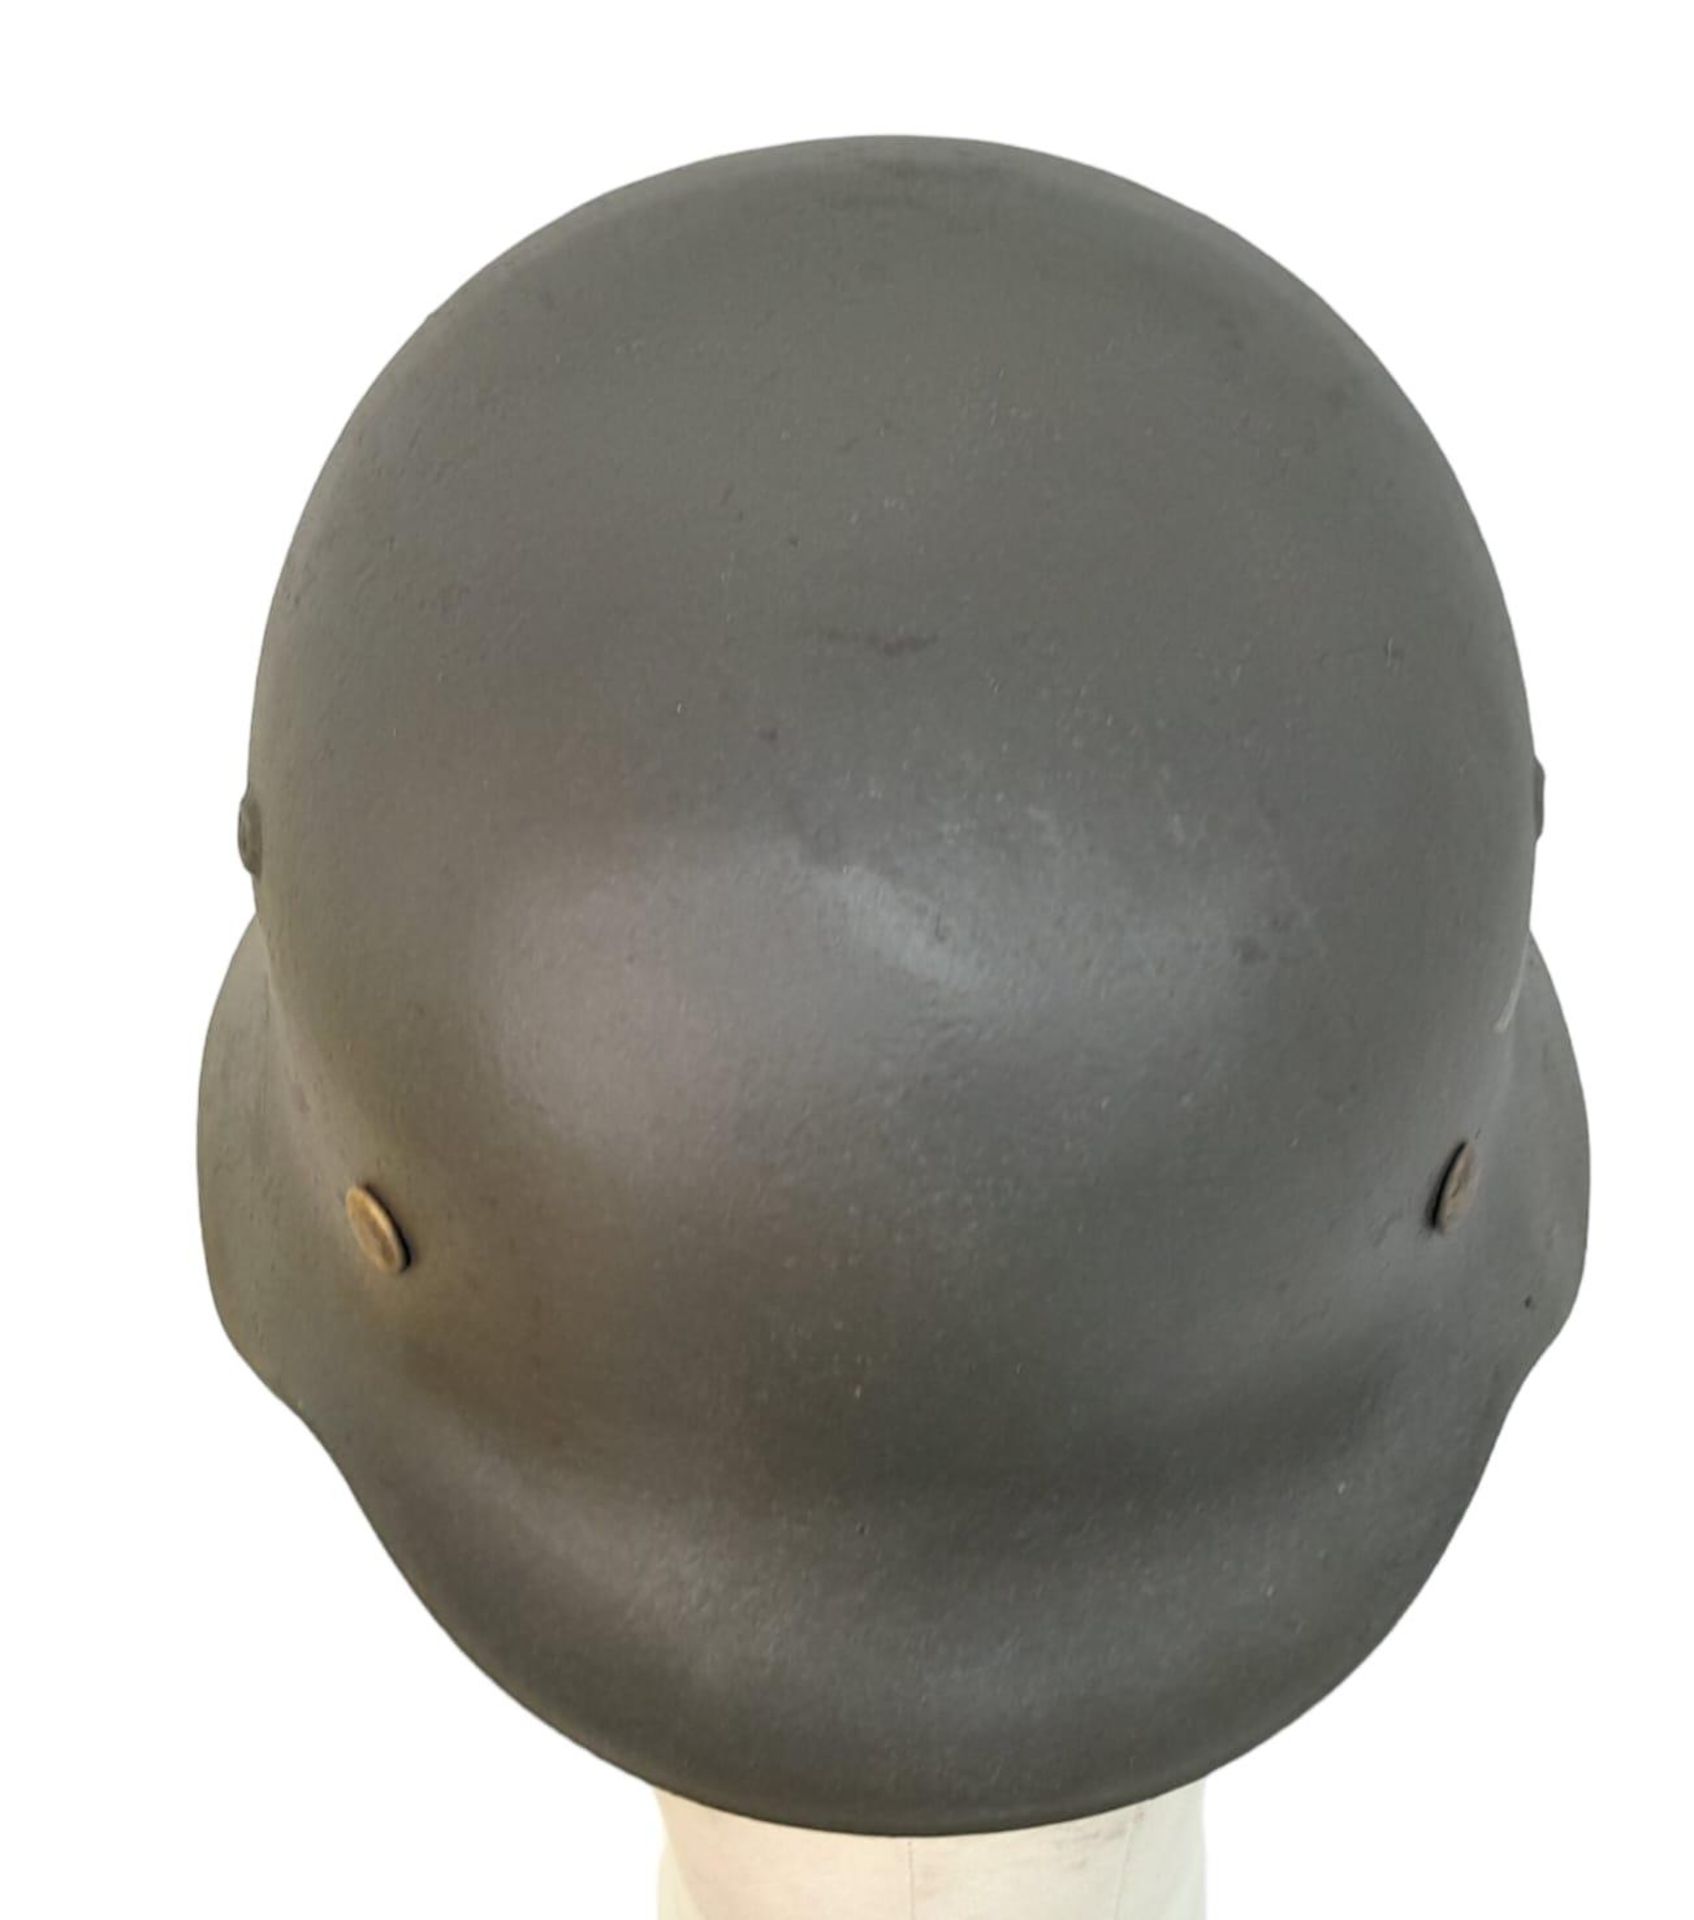 WW2 German Luftwaffe Single Decal M35 Helmet with liner. - Image 3 of 5